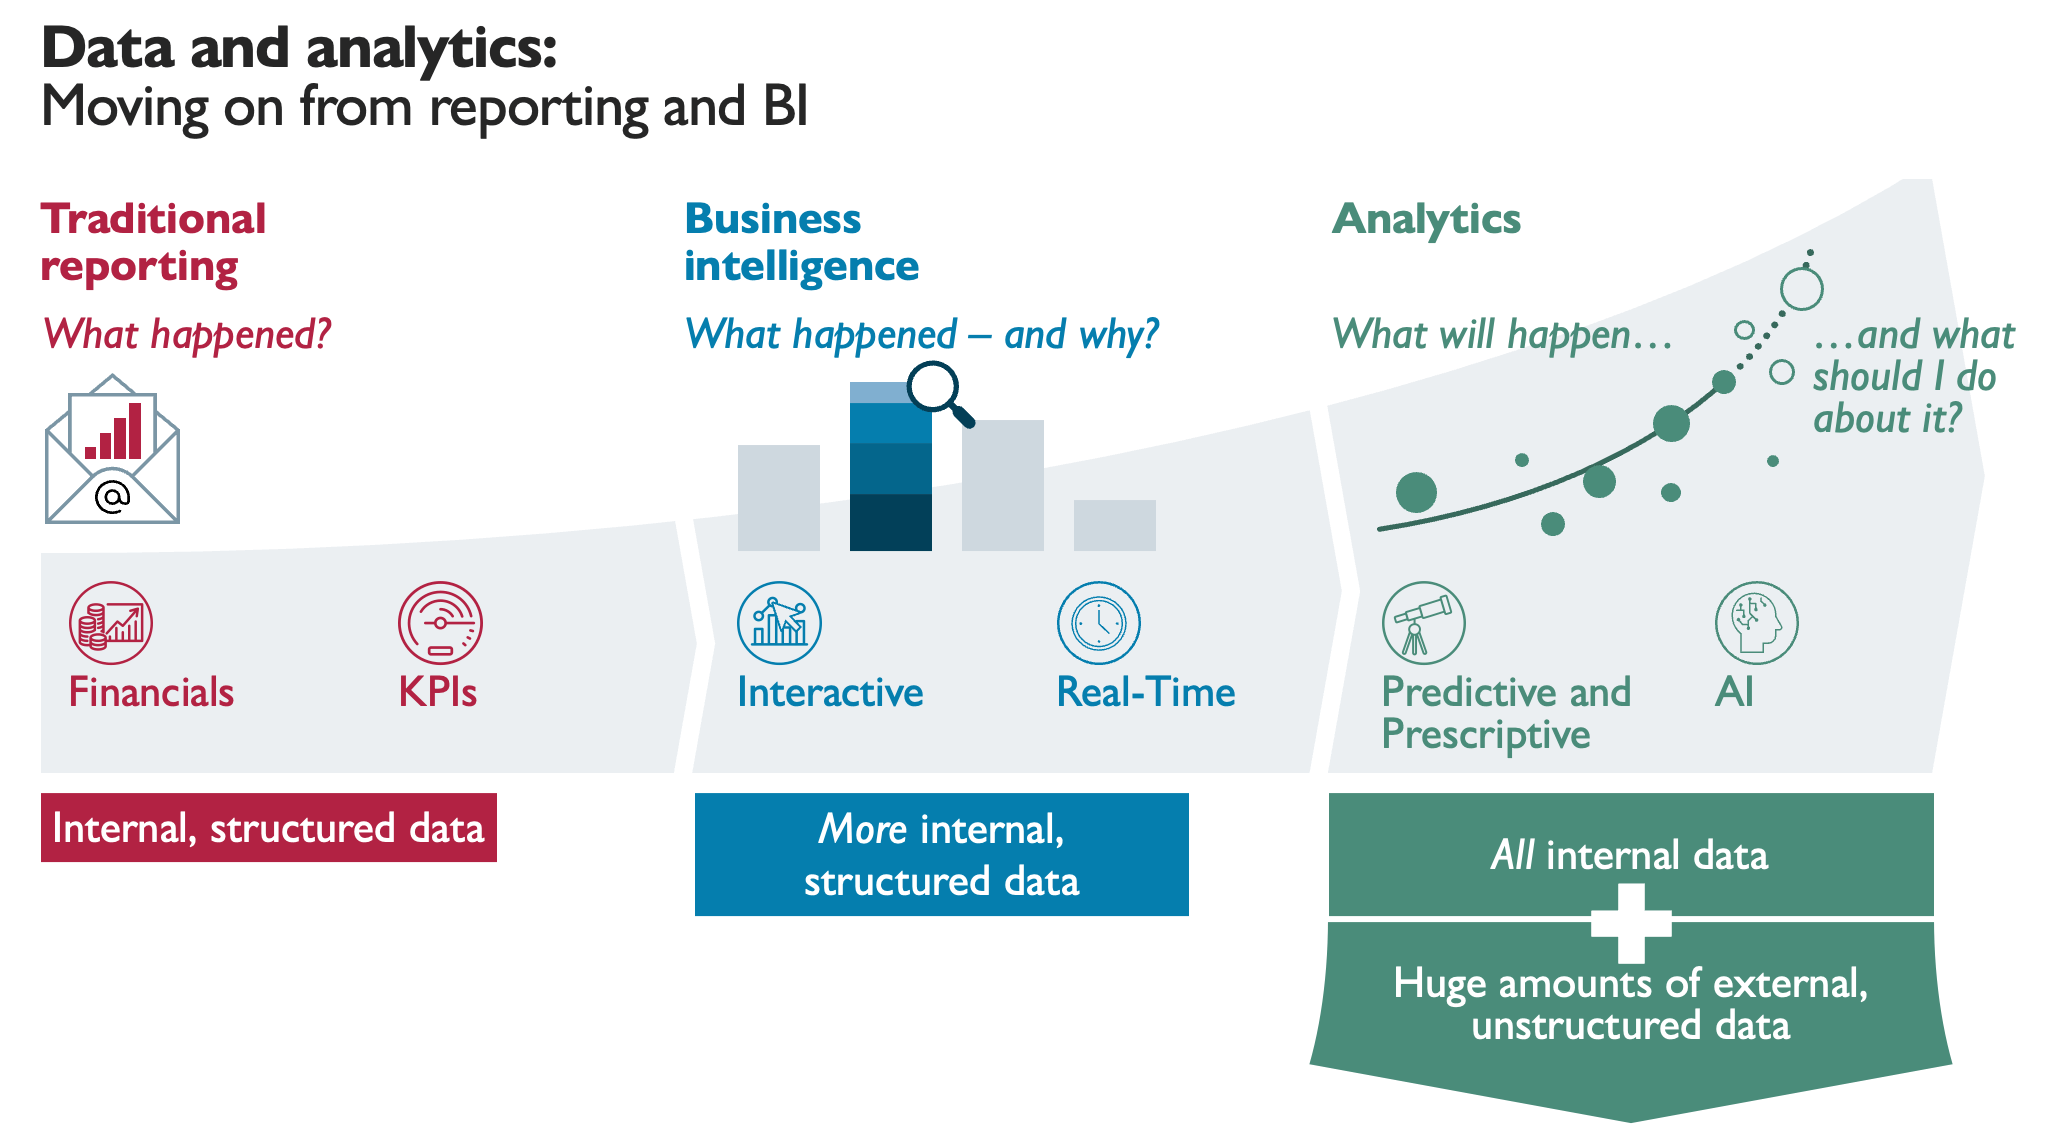 An infographic showing the evolution of data and analytics